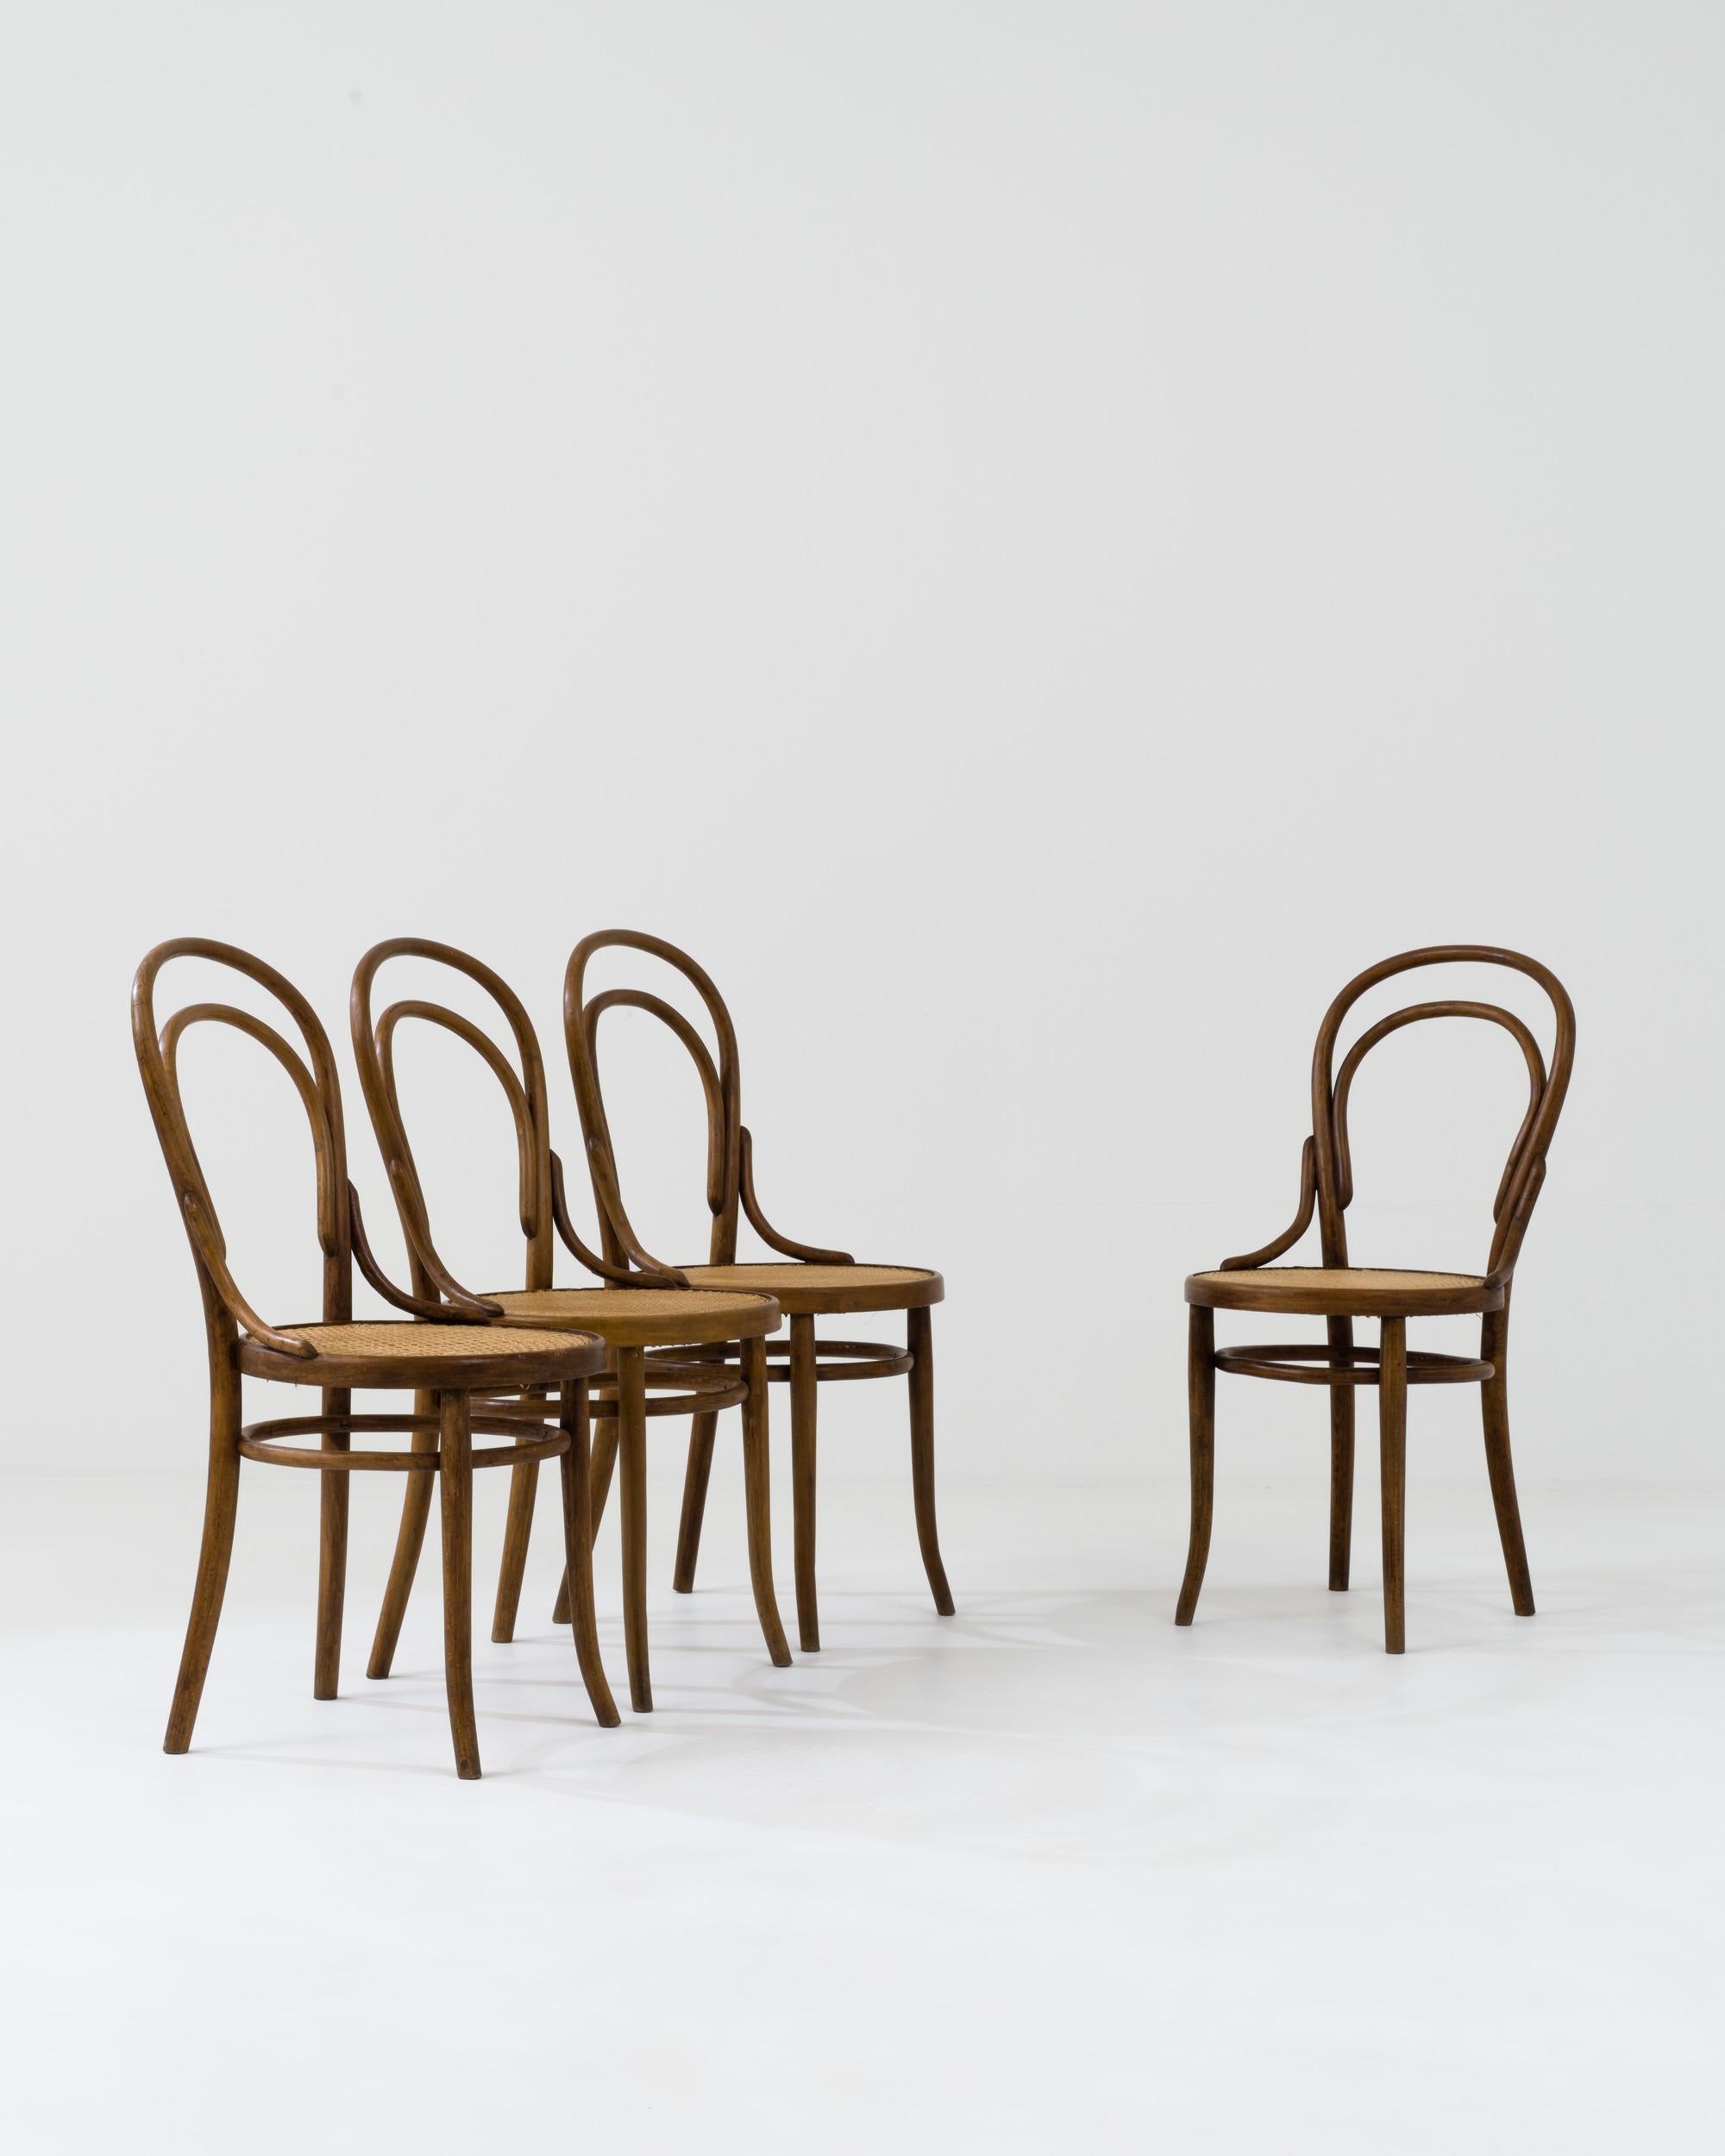 This set of early 20th-century dining chairs was crafted in France. The rounded sculptural backrests seamlessly transition into the back legs, which are supported by elegant circular side stretchers, creating an alluring geometric interplay. The